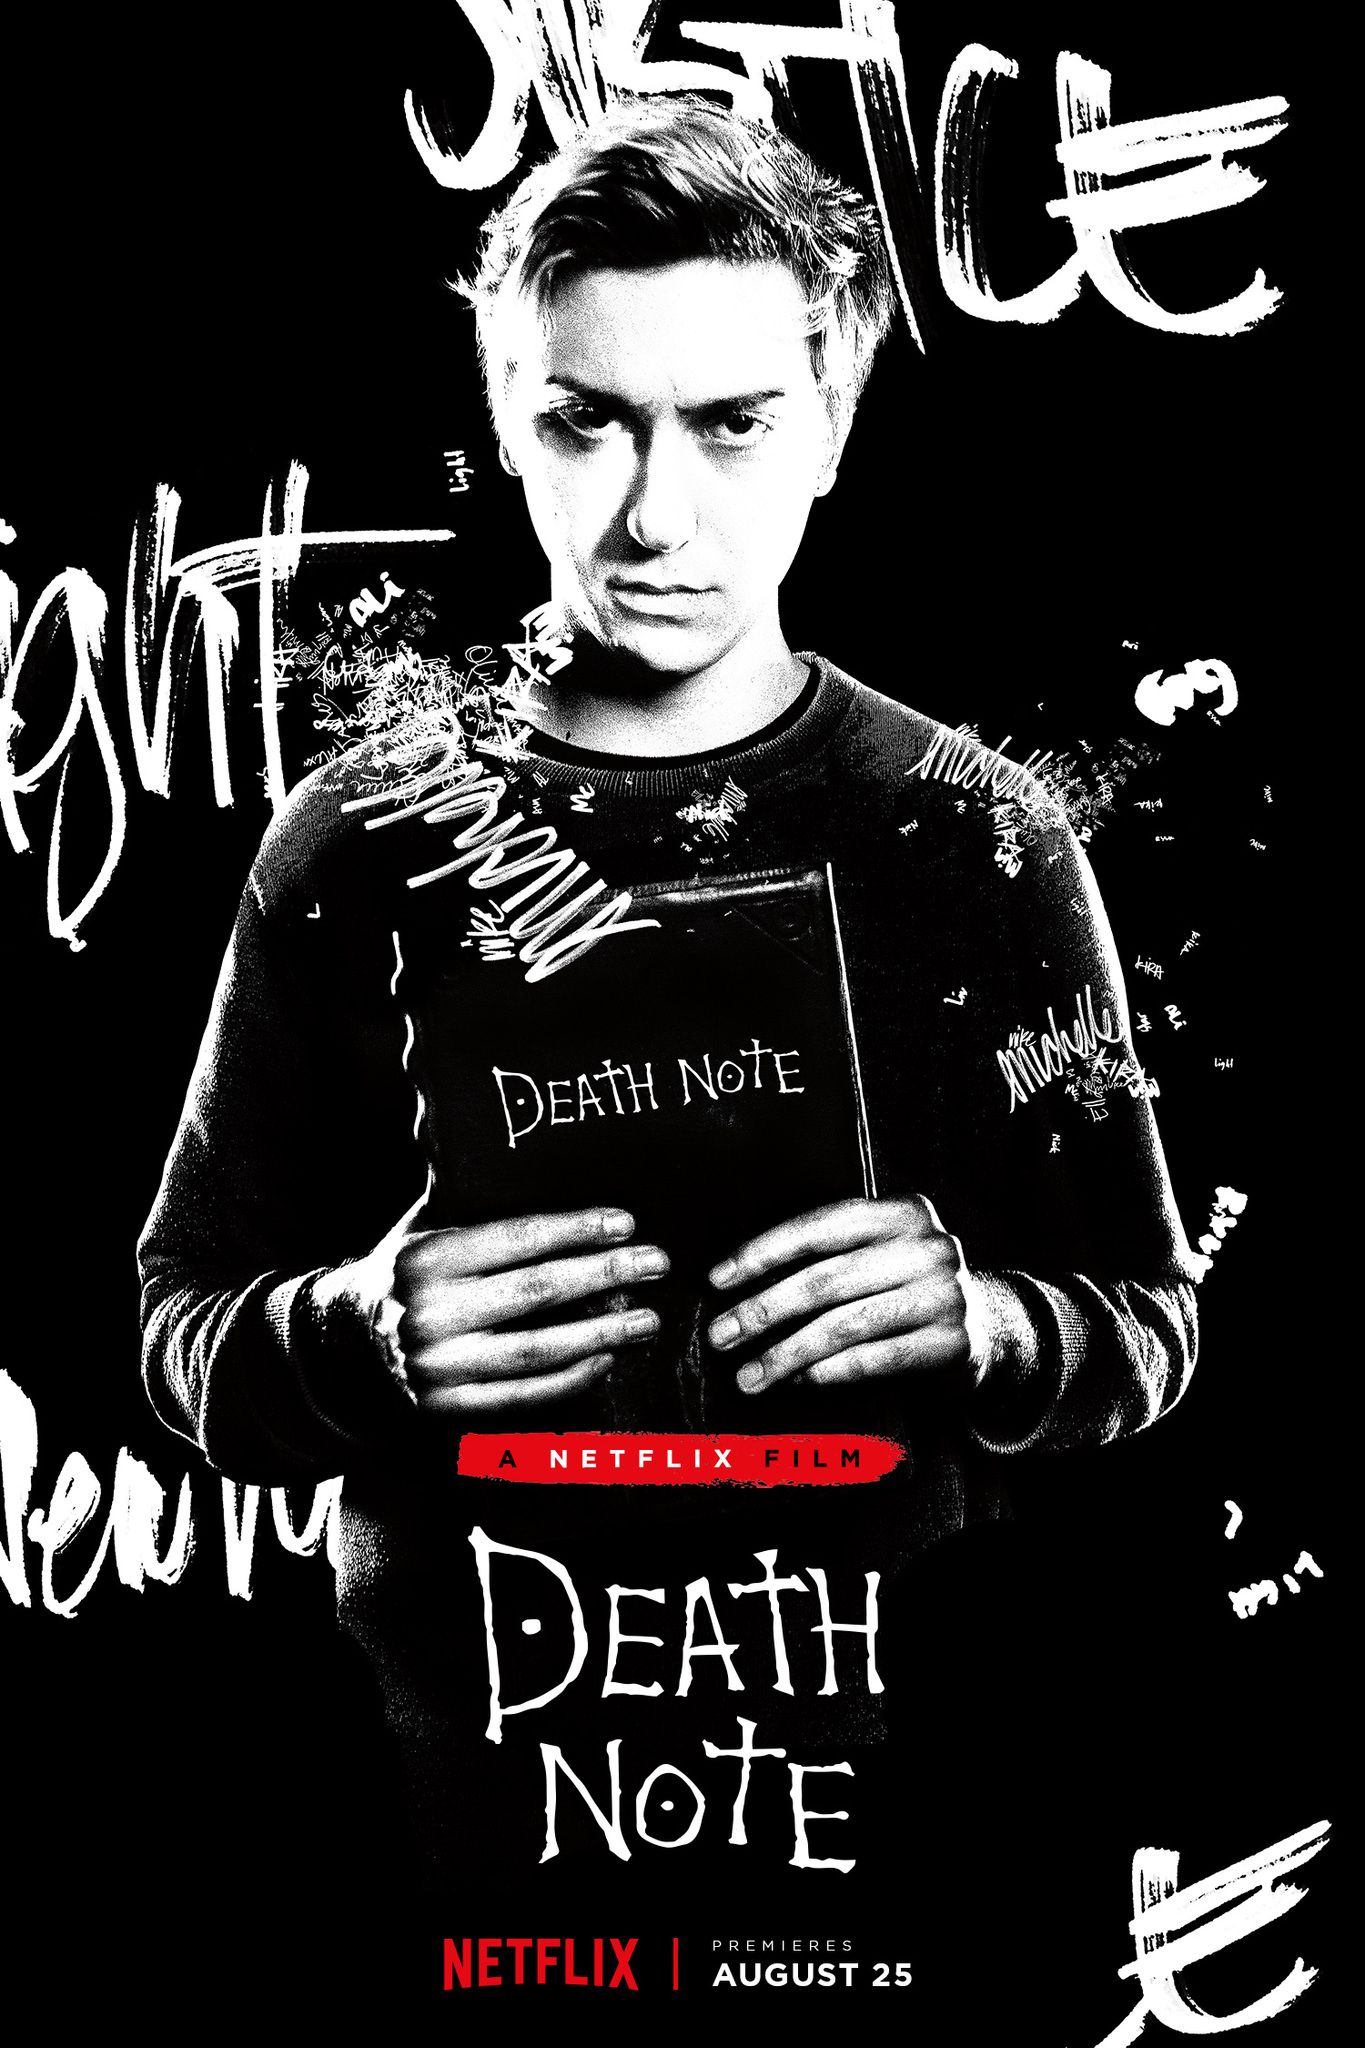 death note image